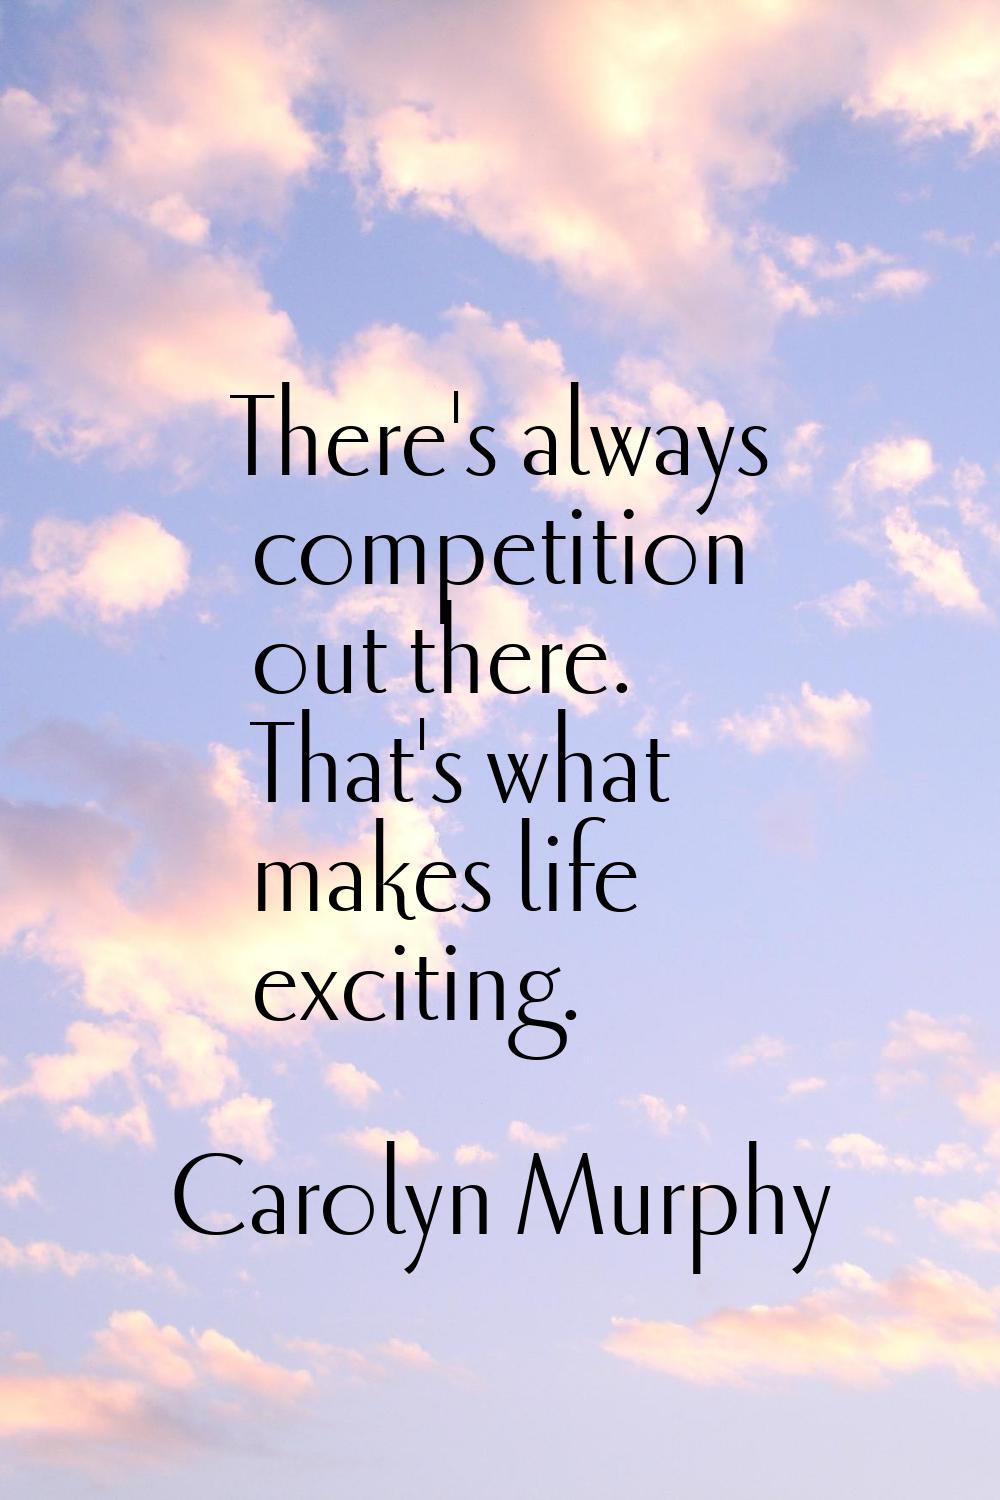 There's always competition out there. That's what makes life exciting.